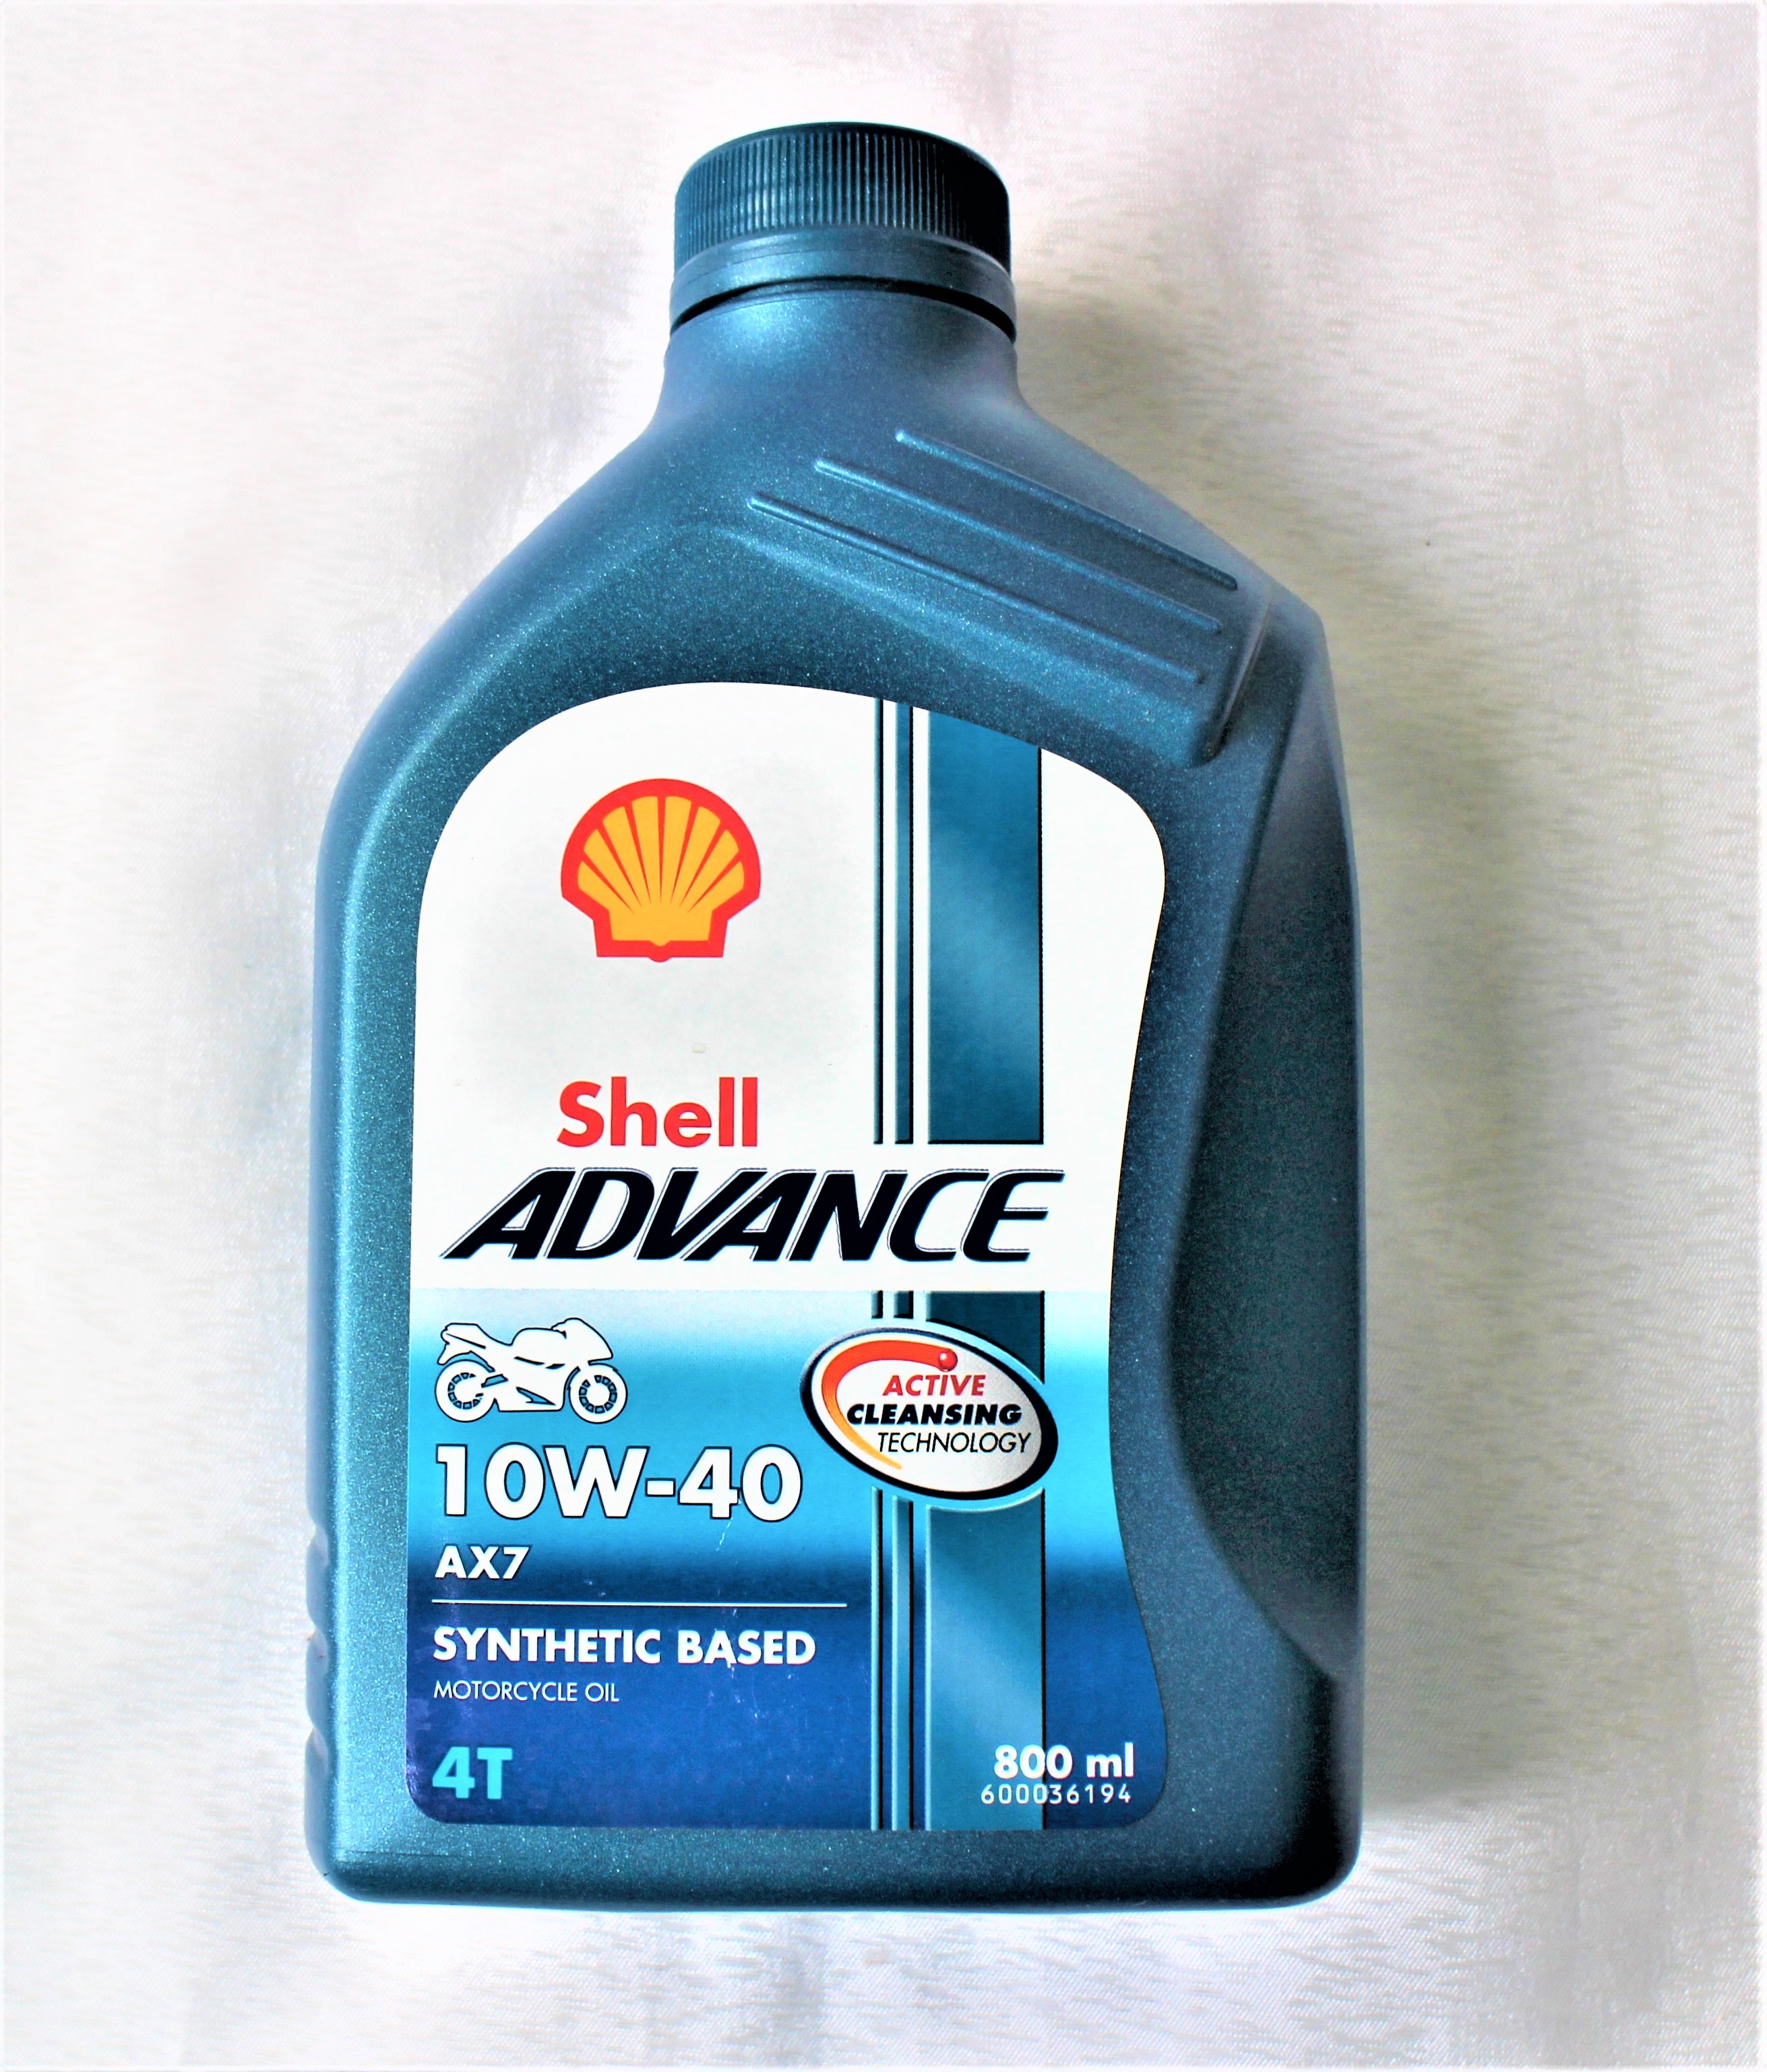 ORIGINAL SHELL ADVANCE 4T SYNTHETIC BASED MOTORYCLE OIL 10W40 AX7 (800